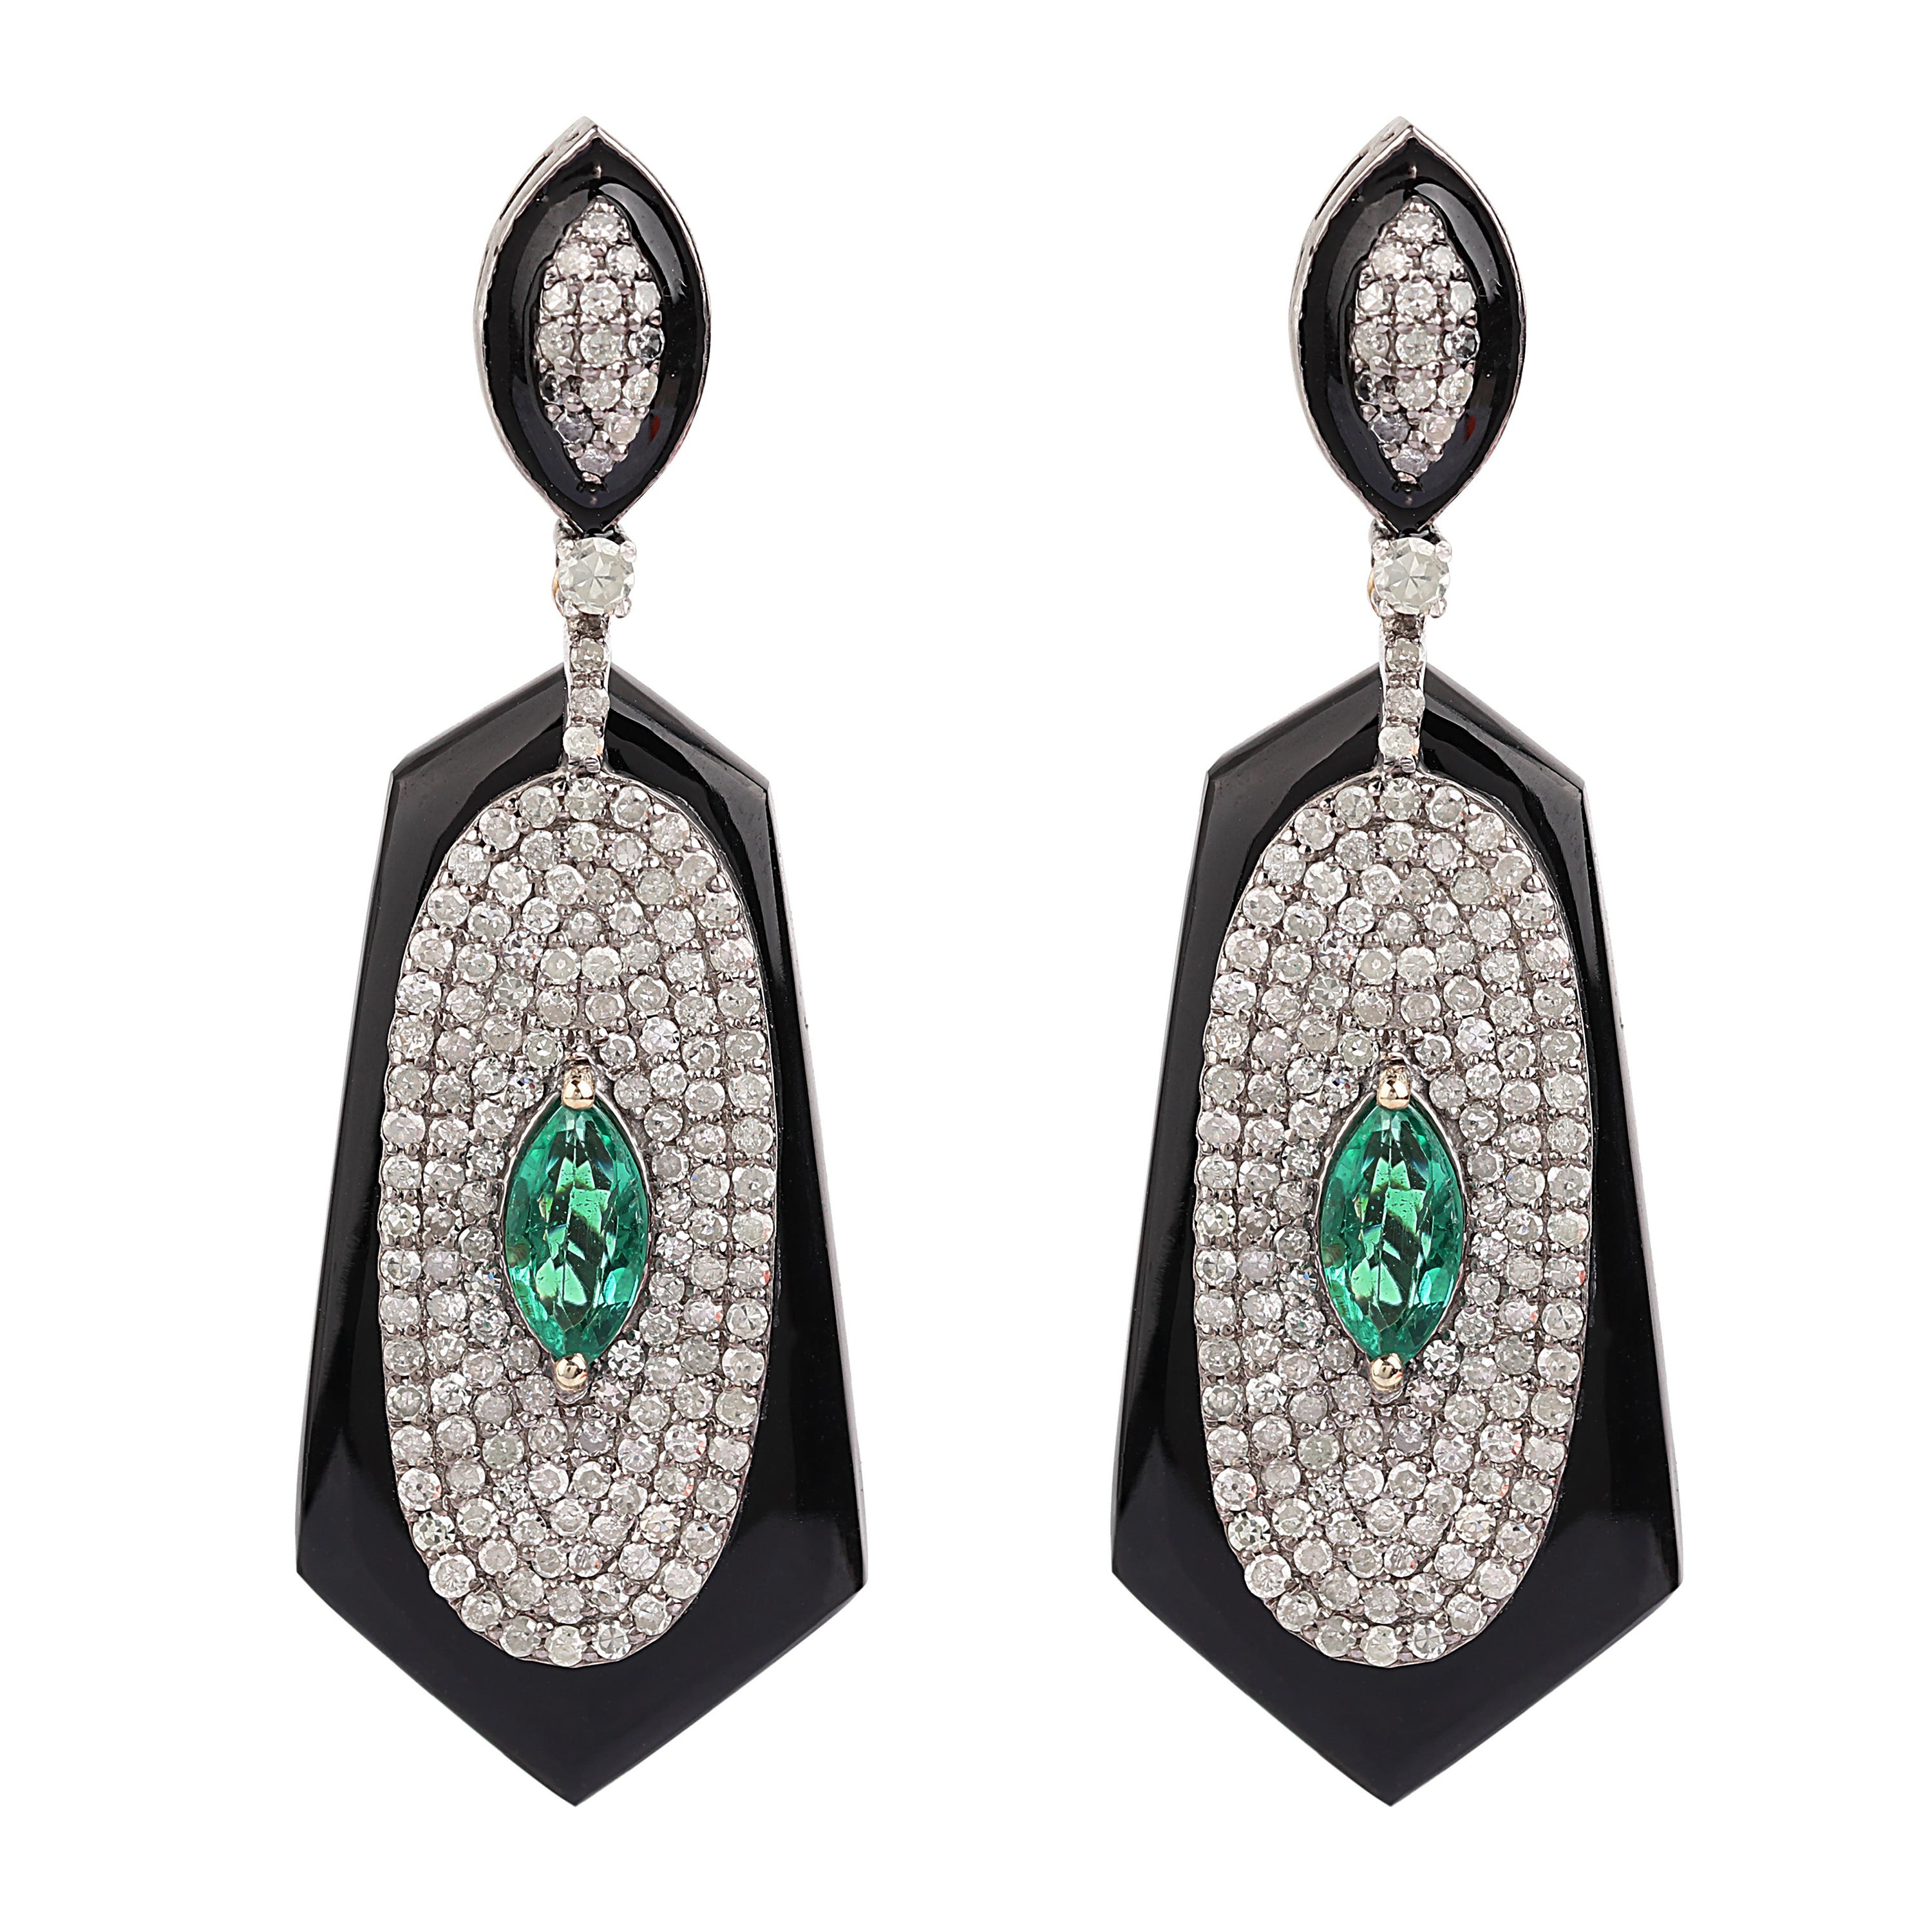 13.80 Carats Diamond, Emerald, and Onyx Drop Earrings in Contemporary Style